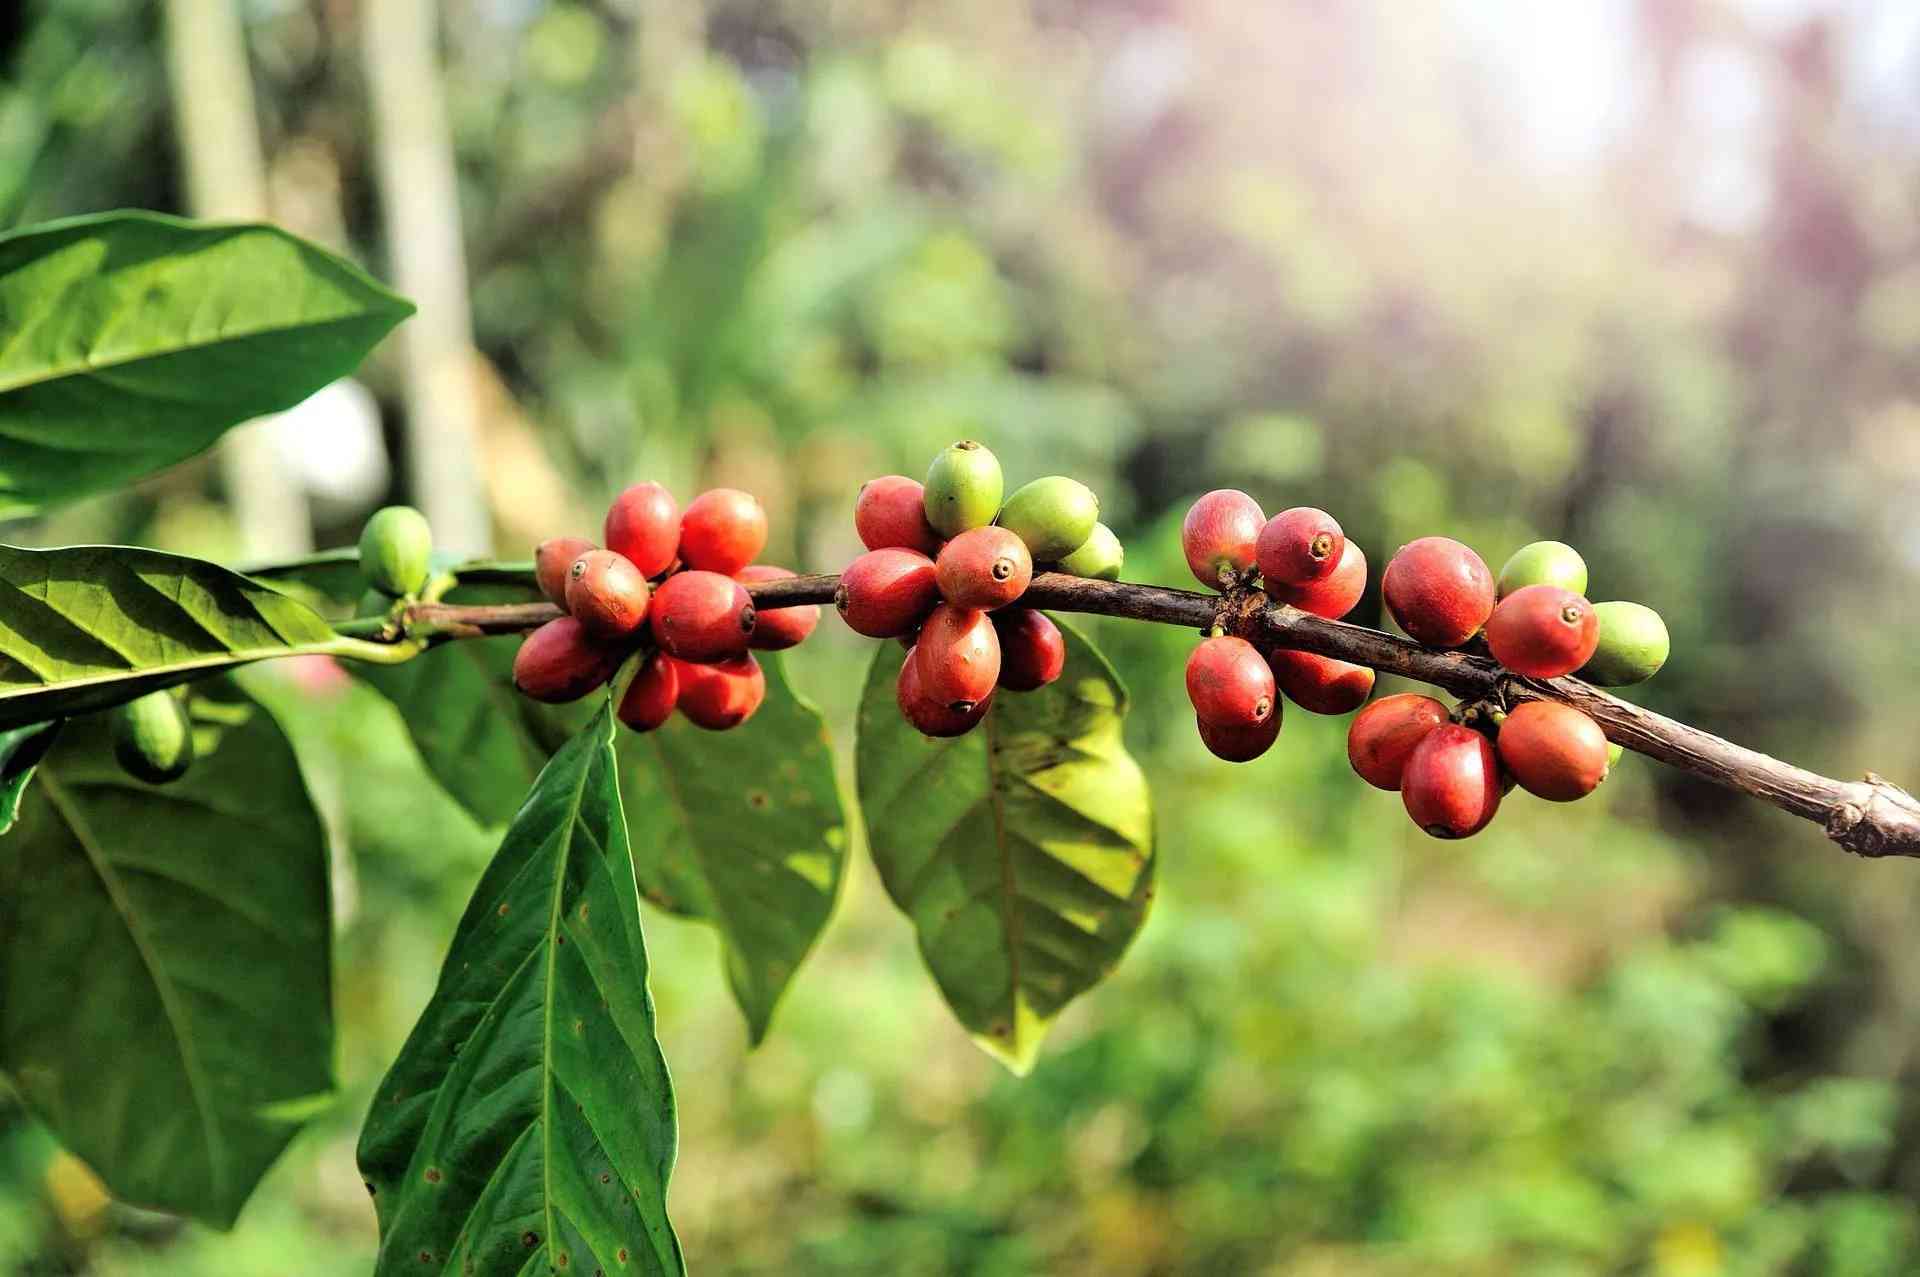 The coffee plant is a largely traded commodity crop